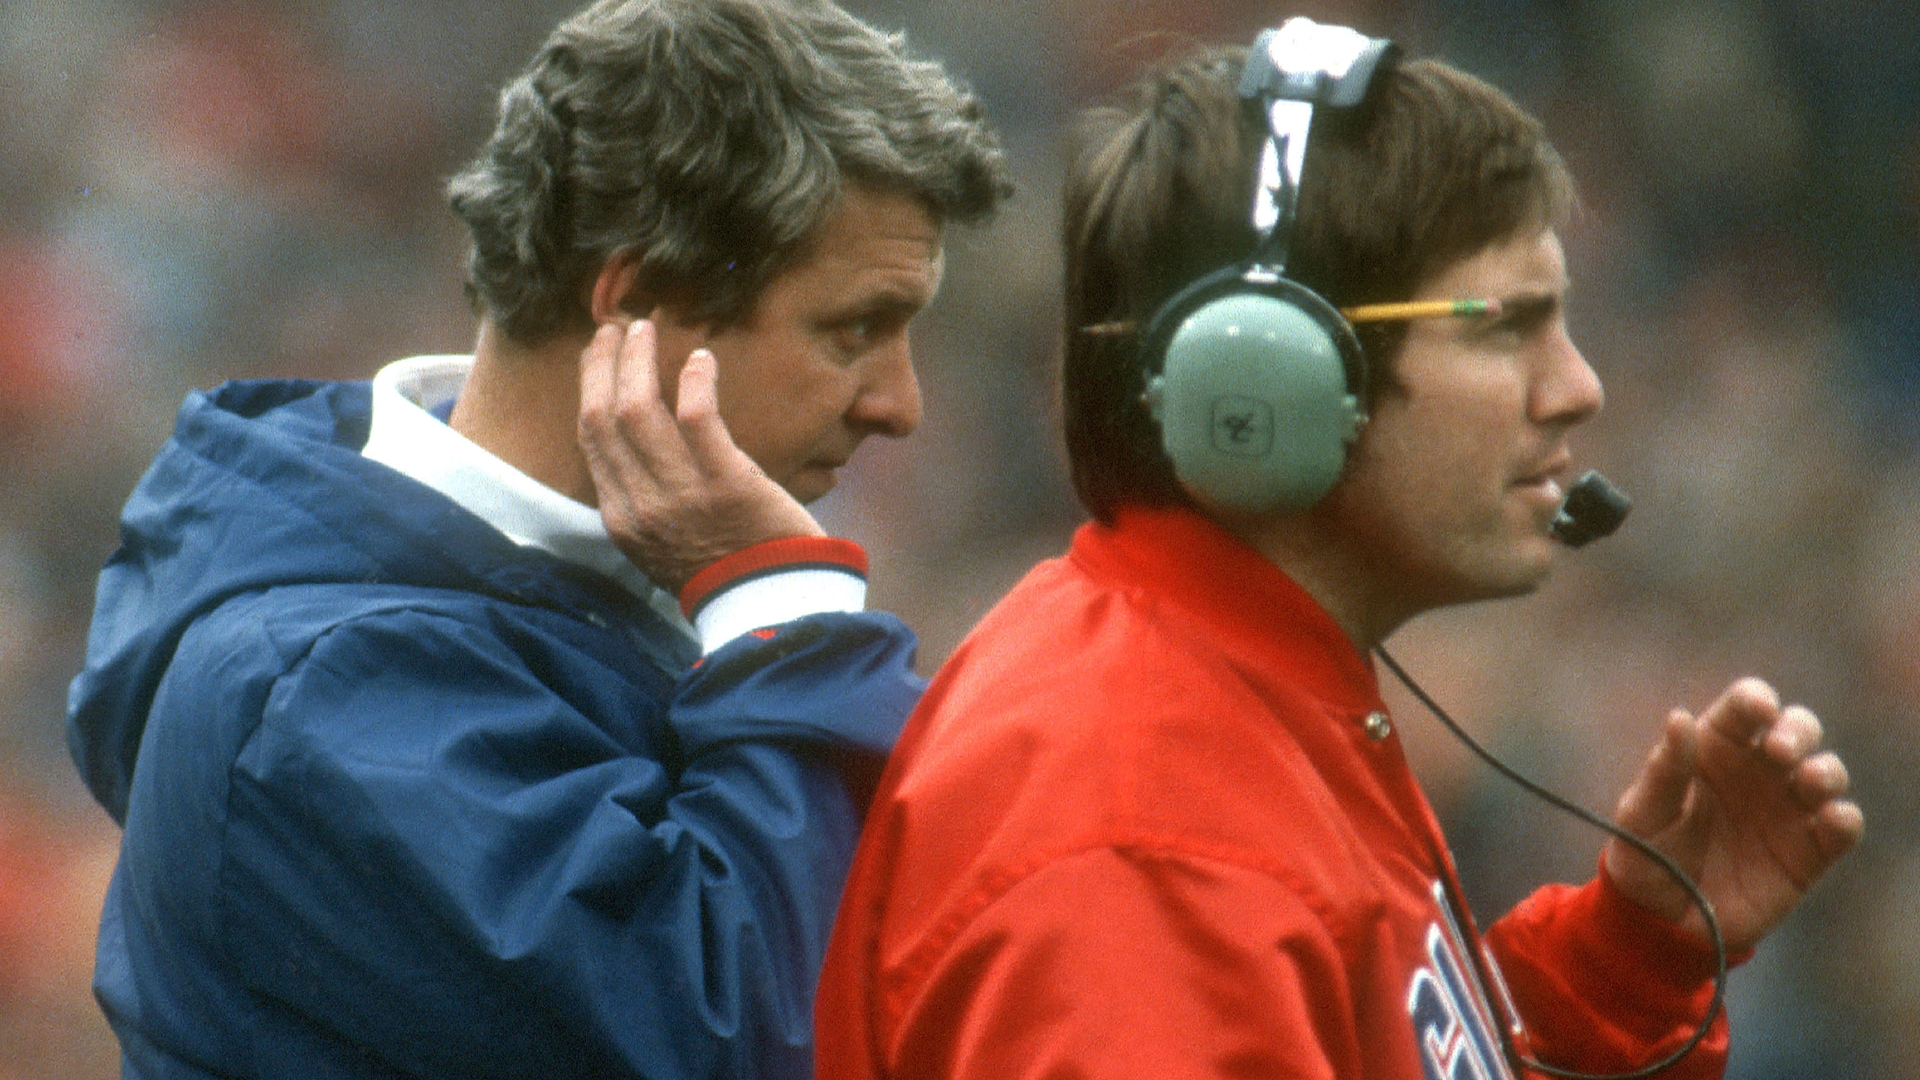 How 30 For 30: "The Two Bills" came to fruition